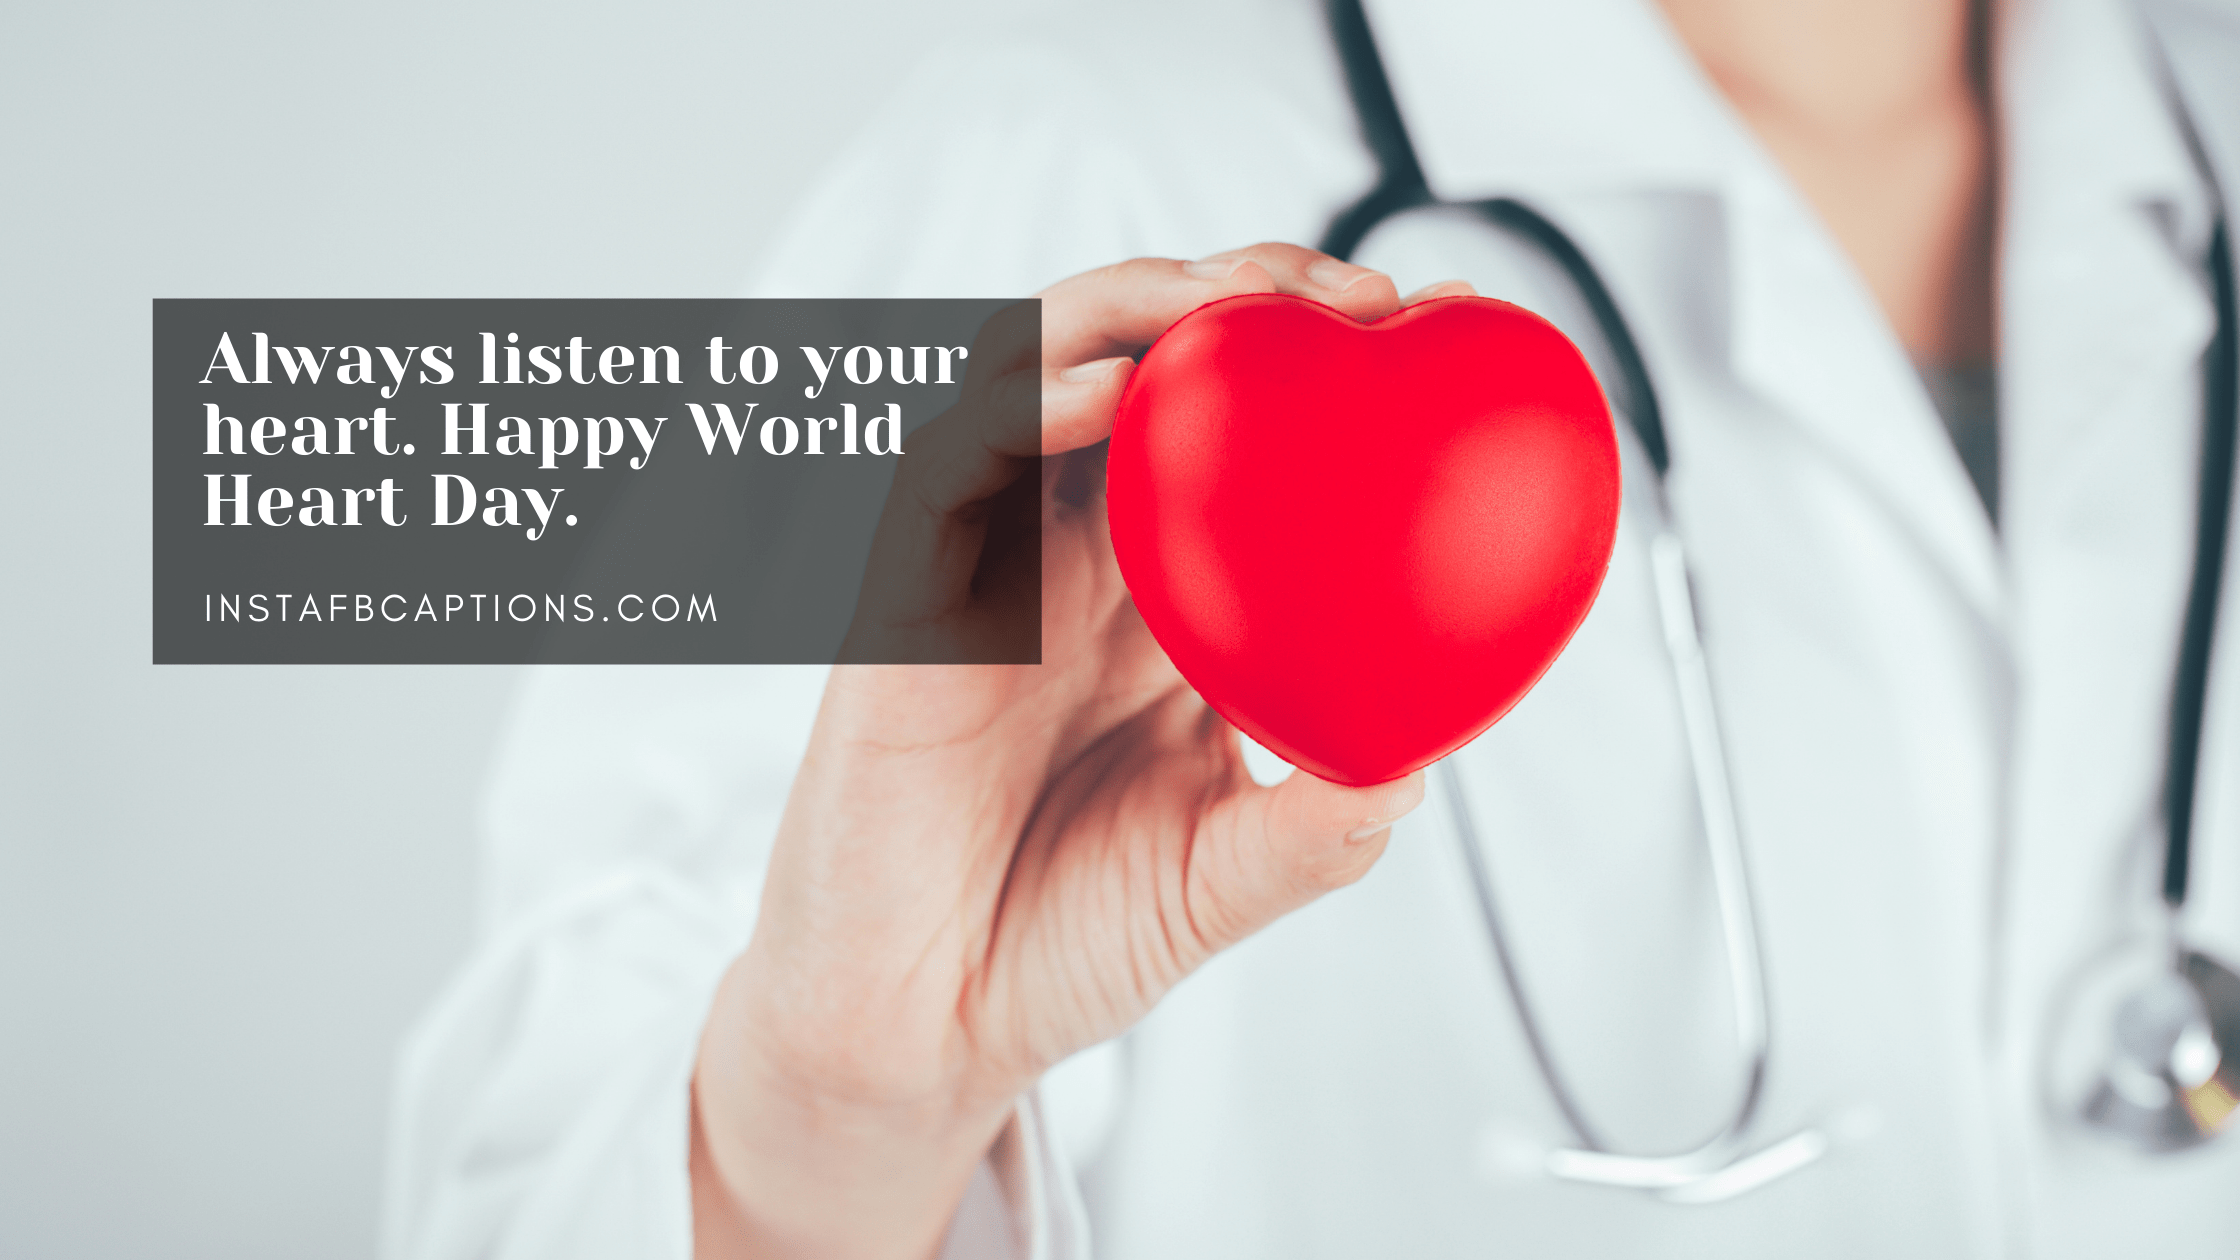 Healthy Life Healthy Messages For World Heart Day  - Healthy Life Healthy Messages for World Heart Day - 99 World Heart Day Captions, Quotes, Wishes in 2022